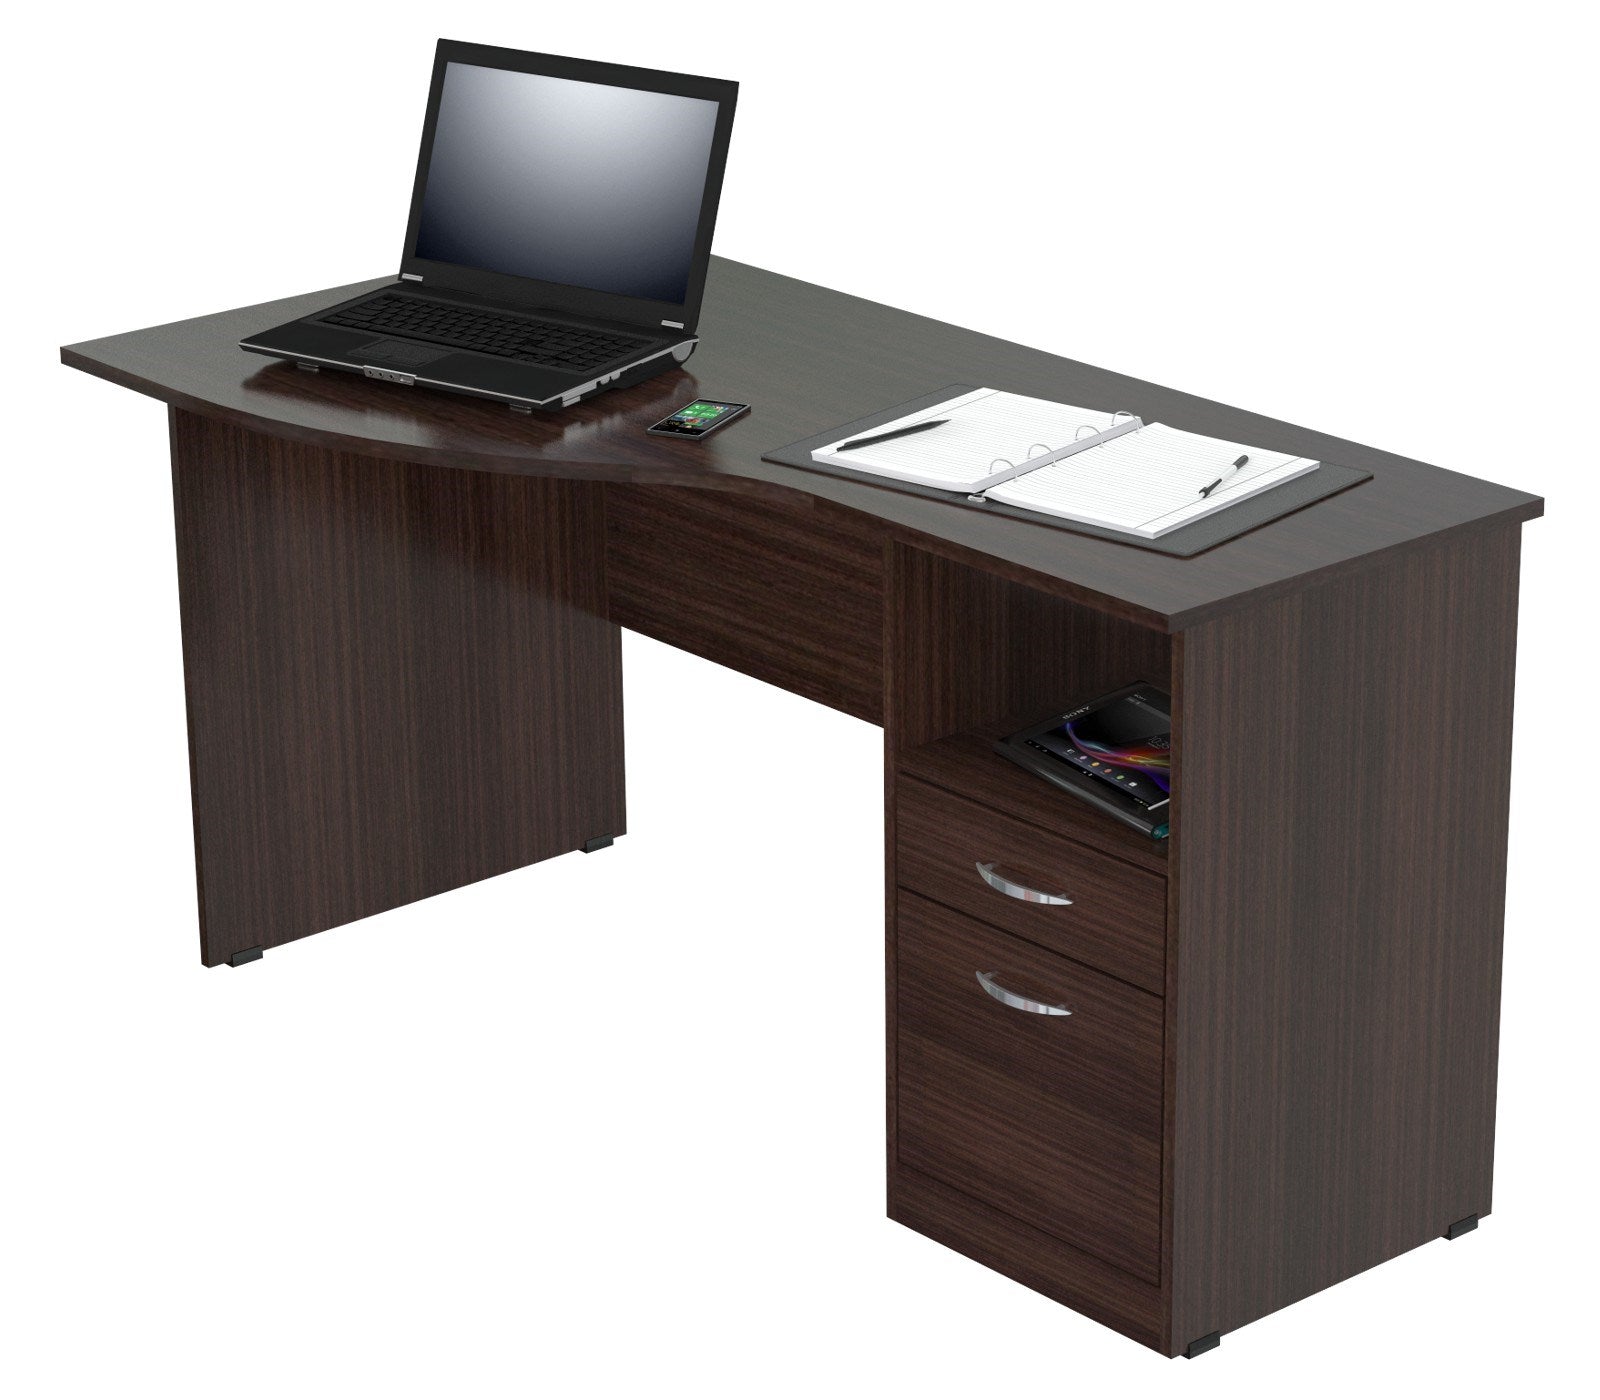 55" Espresso Computer Desk With Two Drawers